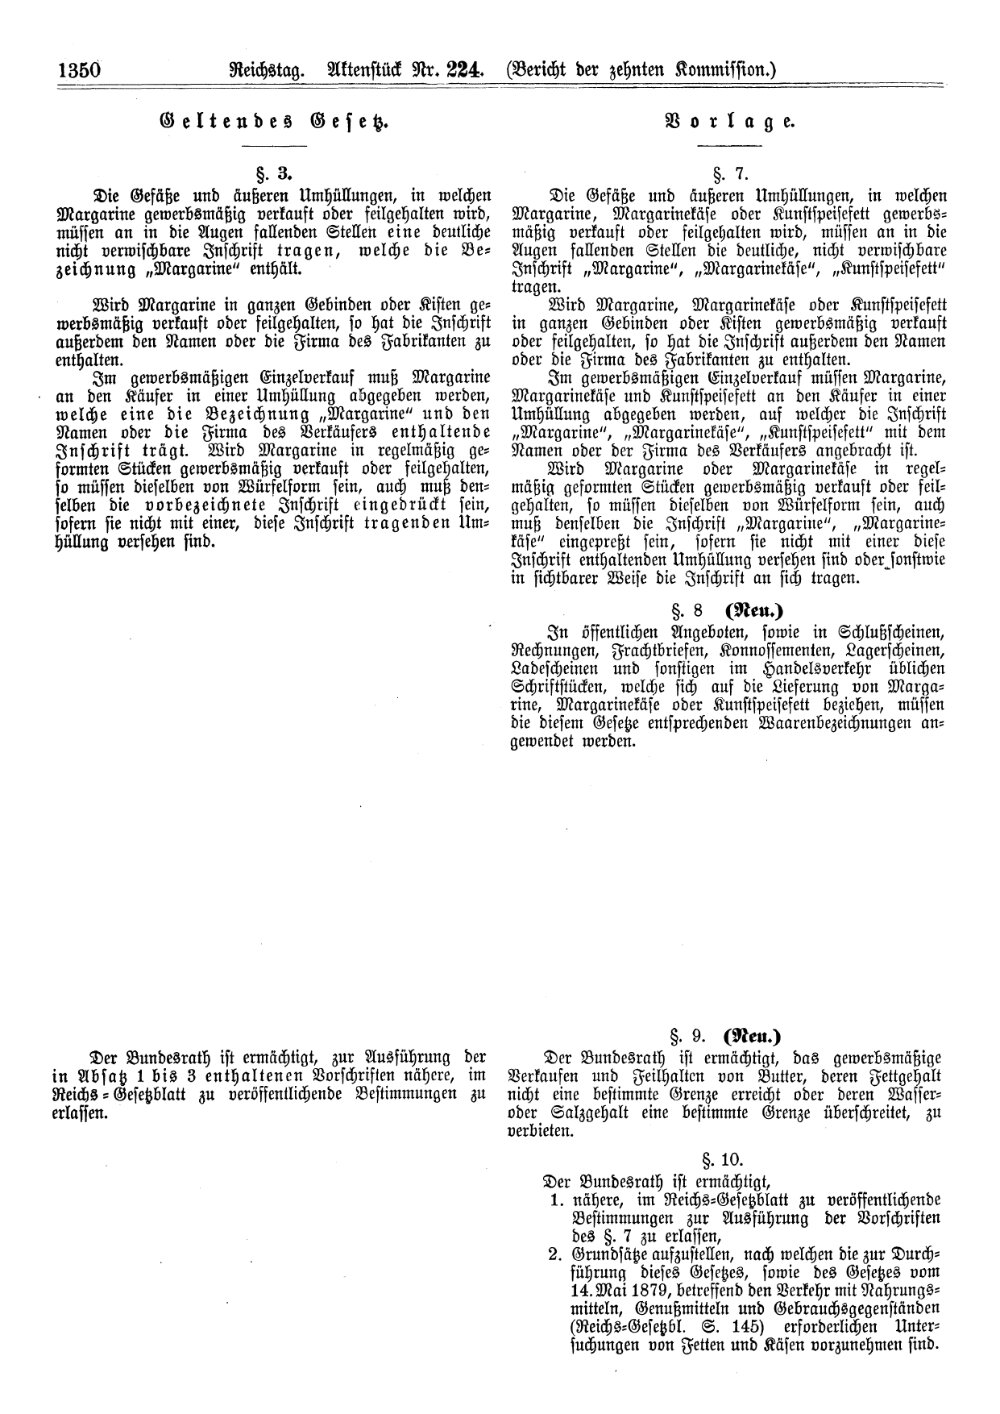 Scan of page 1350